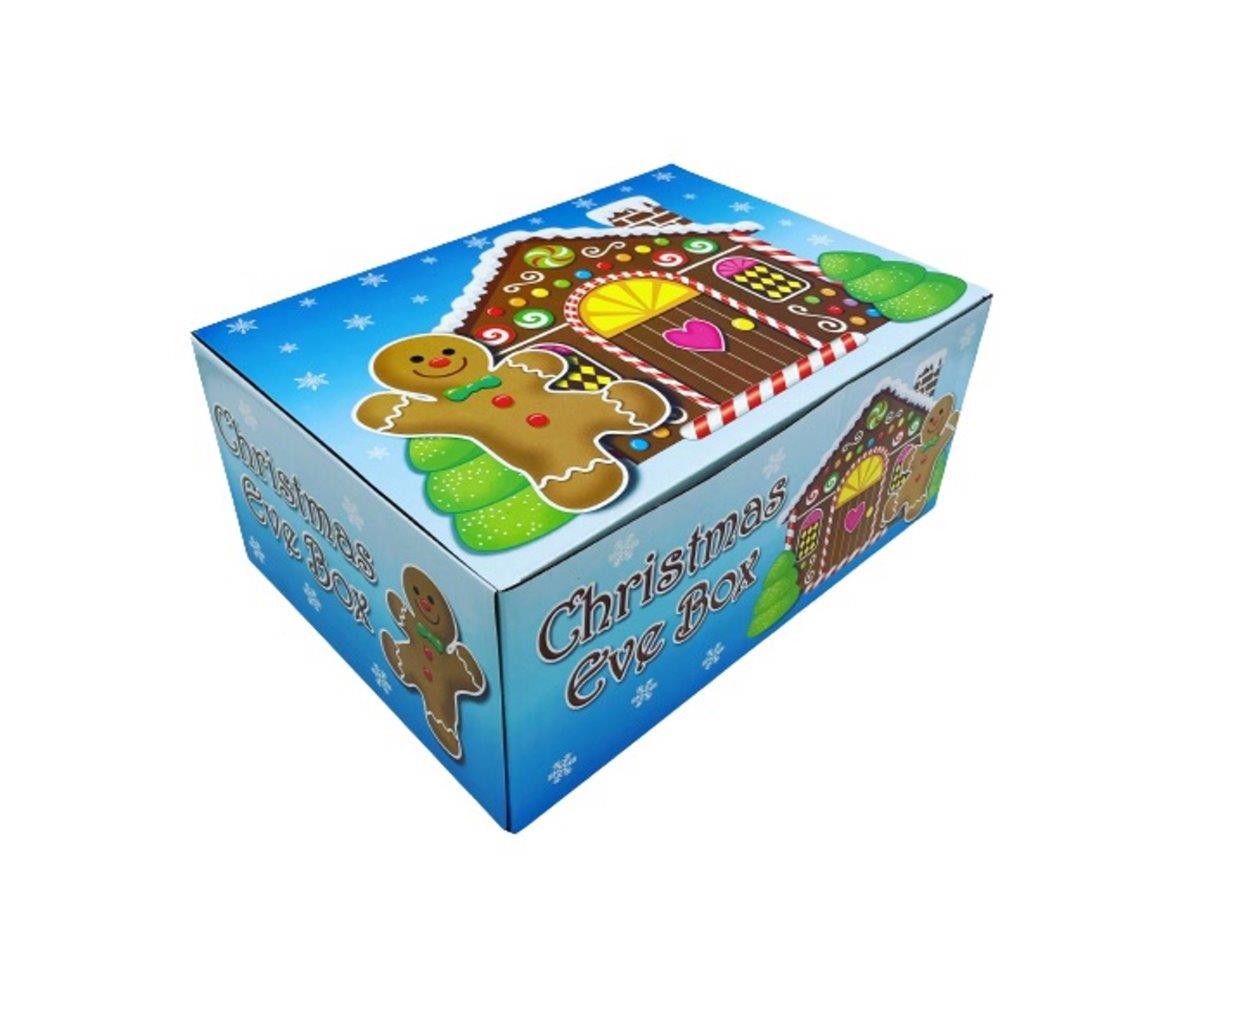 Christmas Eve Box - Including lots of goodies! -  Gingerbread Design